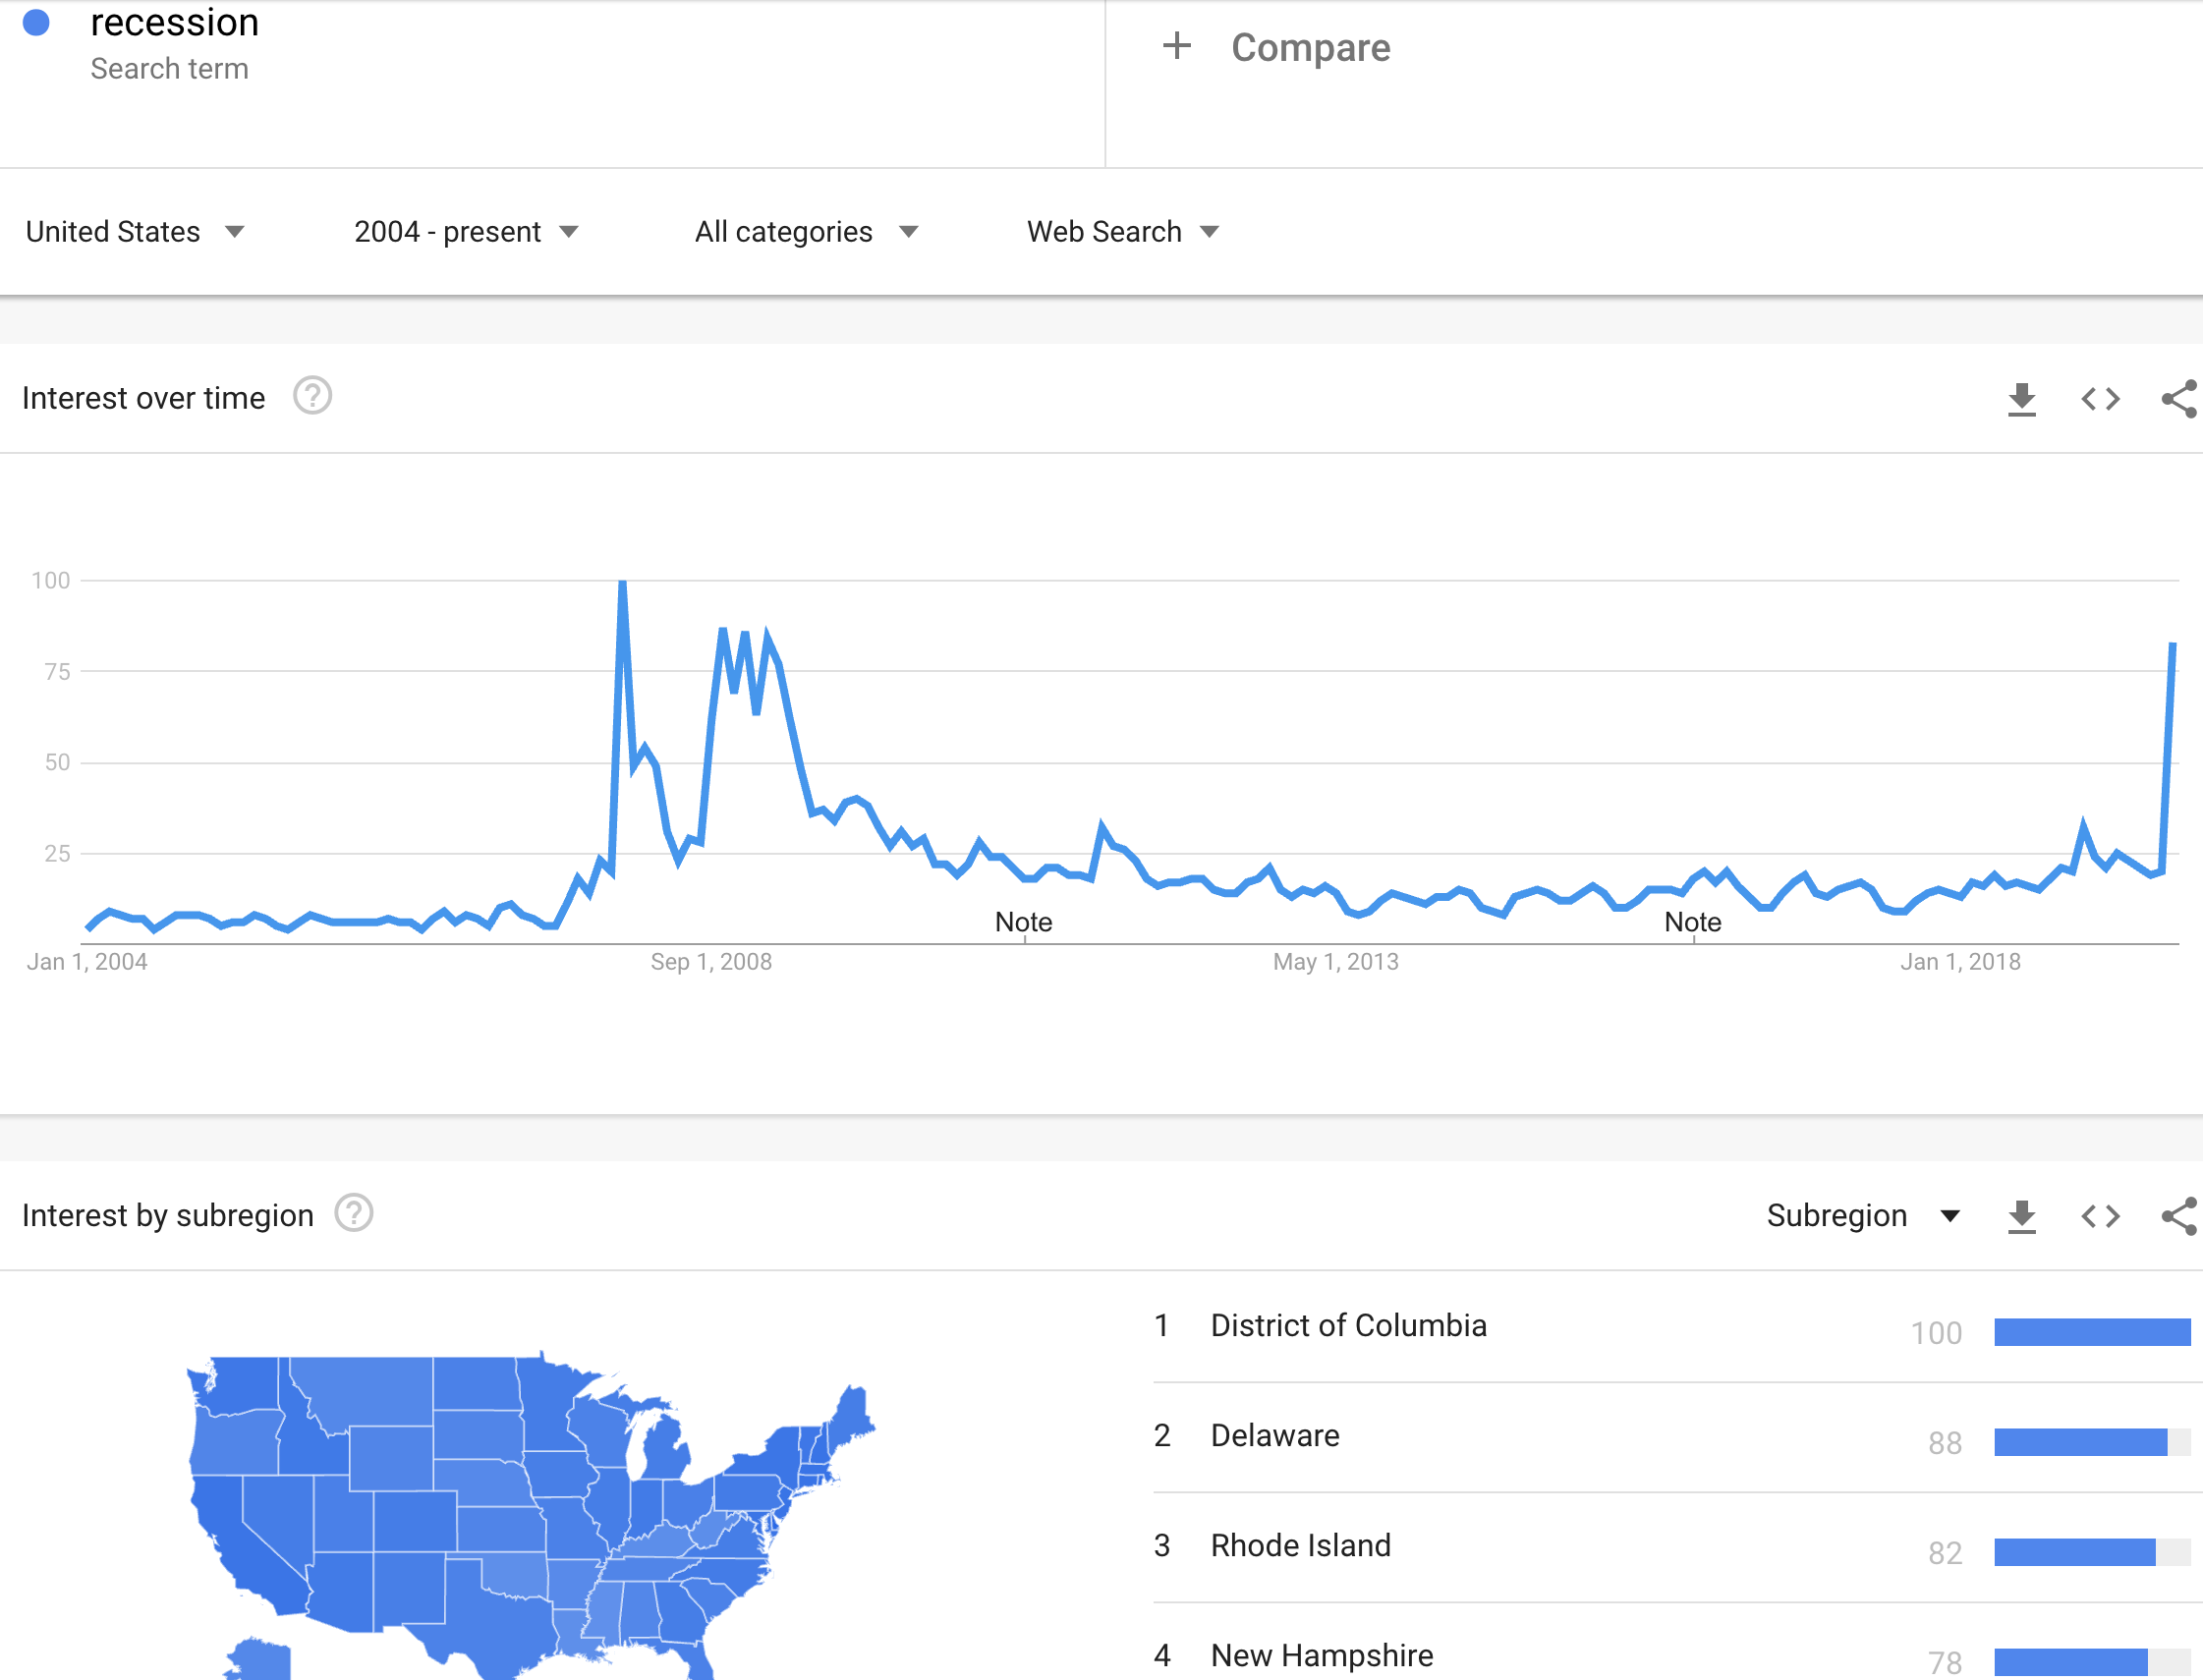 Google Trends for searches on "recession"